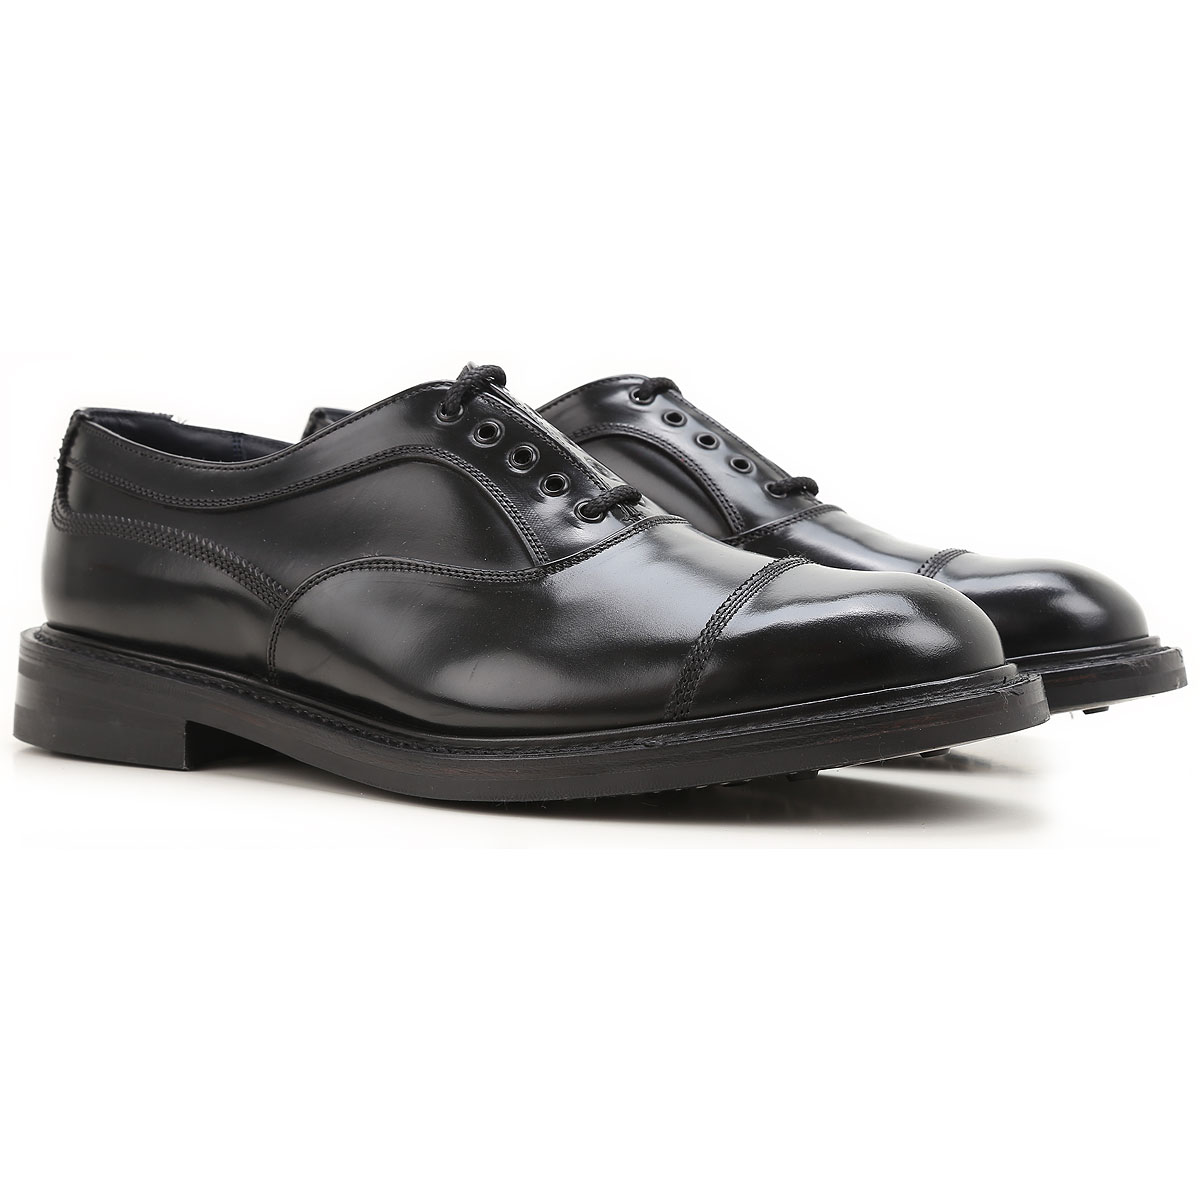 Mens Shoes Trickers, Style code: dunlop-sds-